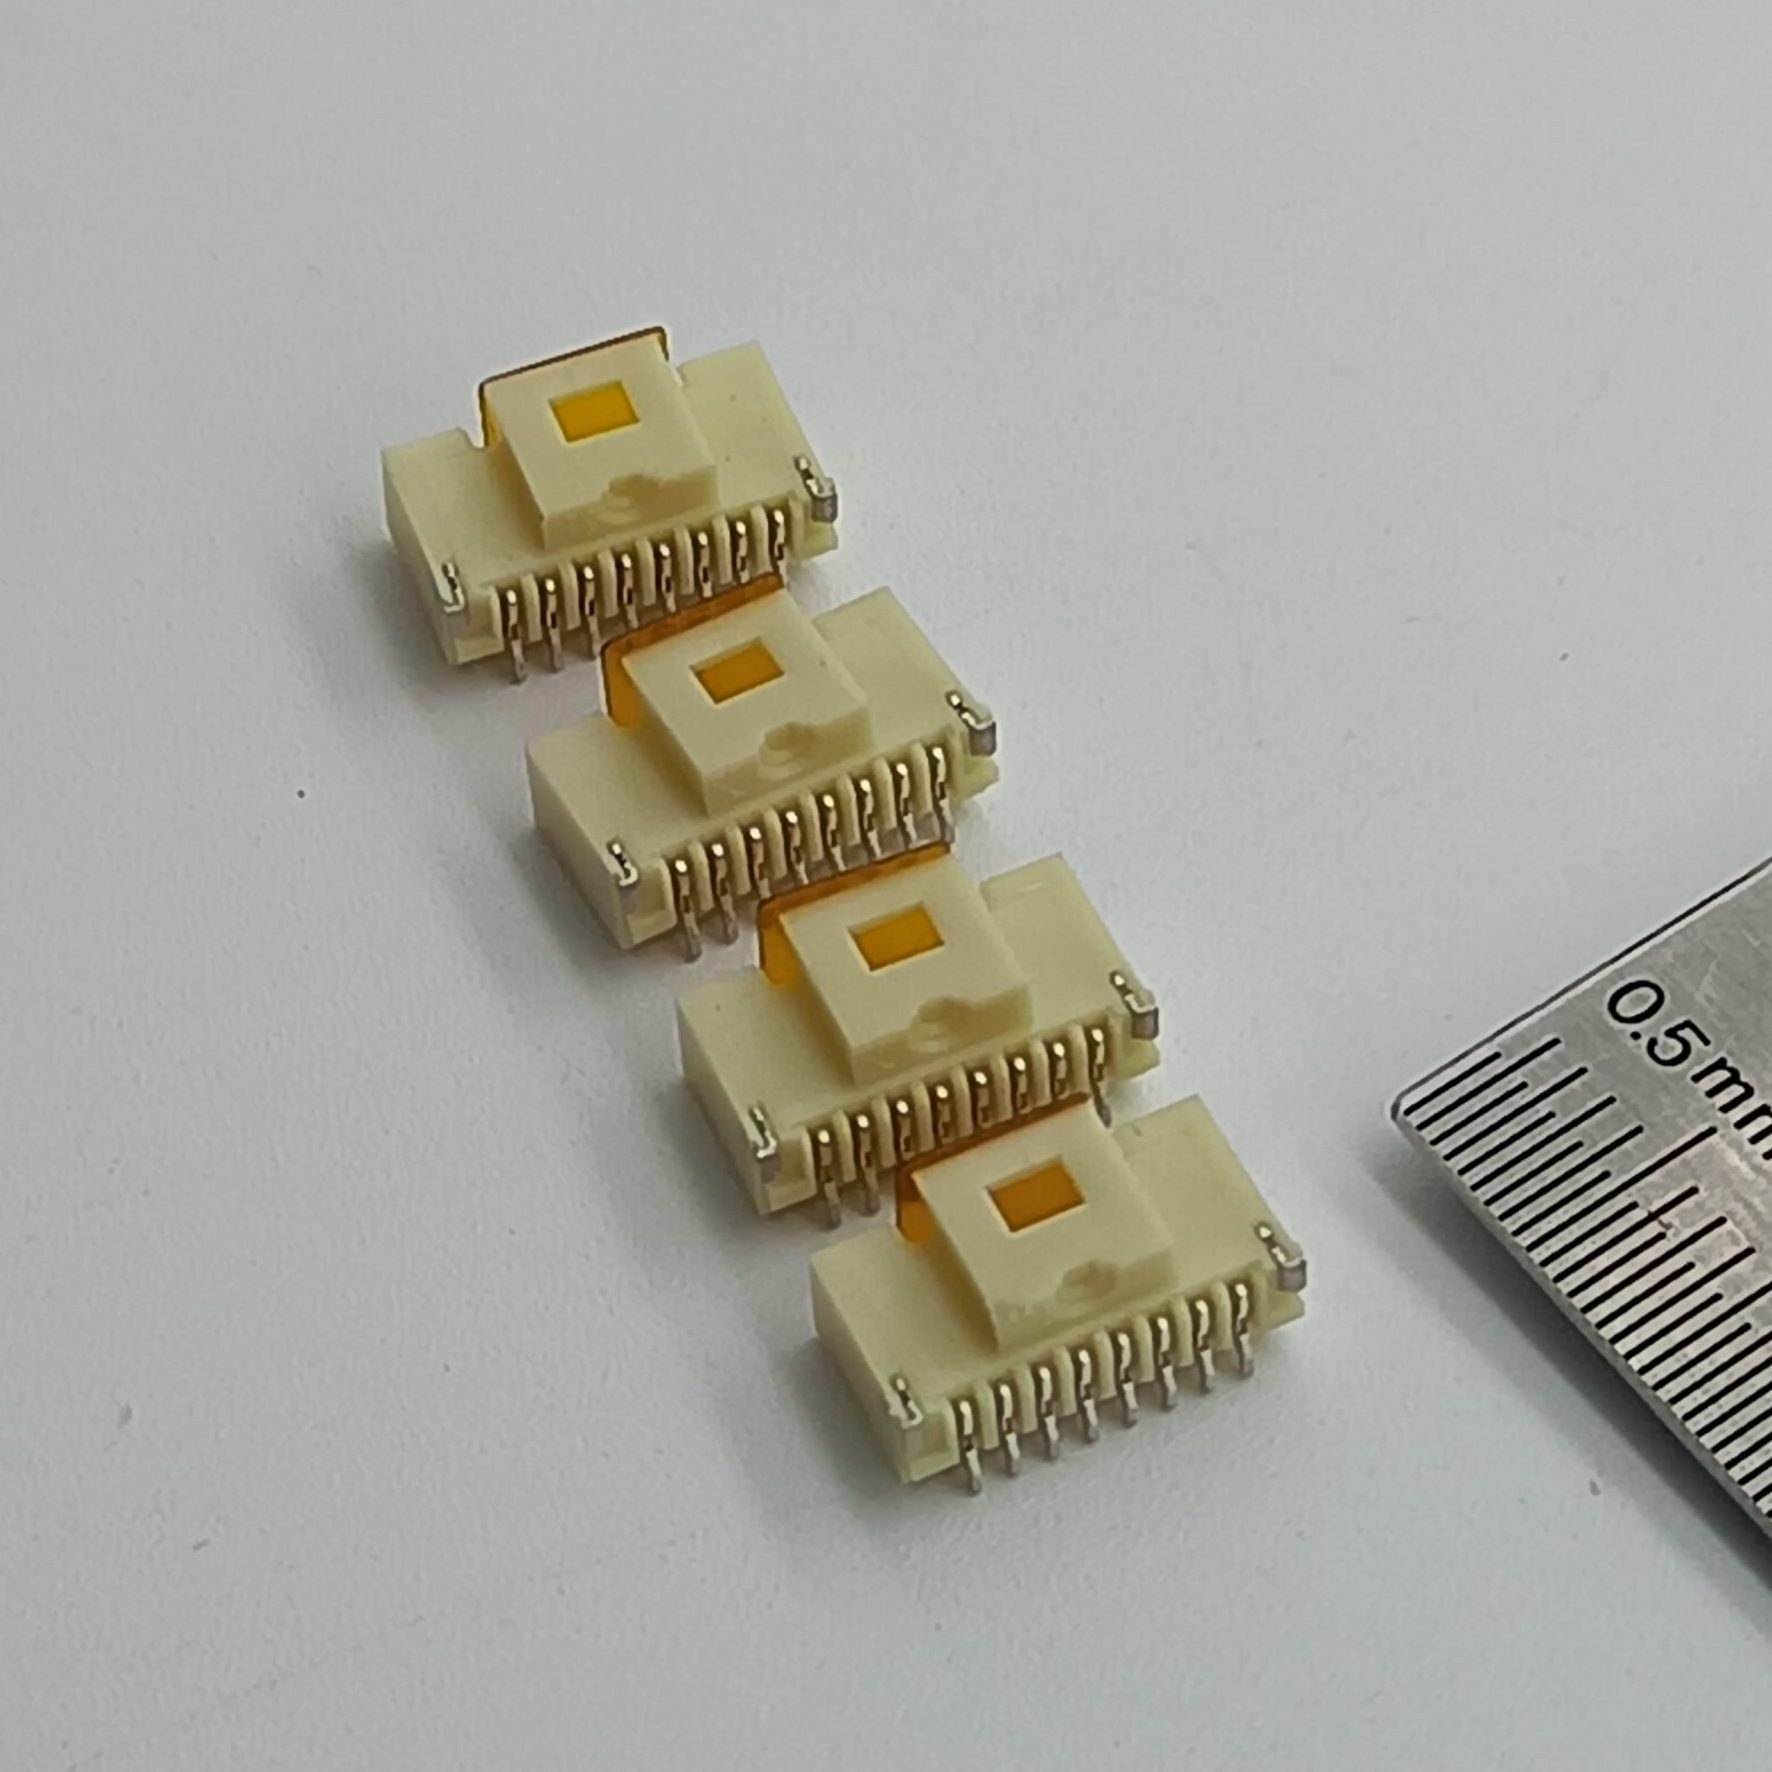 1.0mm pitch,single row,vertical,SMT,Gold plated,Friction Lock,8 Circuits,Natural,Pico-Clasp PCB Header,5044490807,5013310807,Power header, pcb mount header